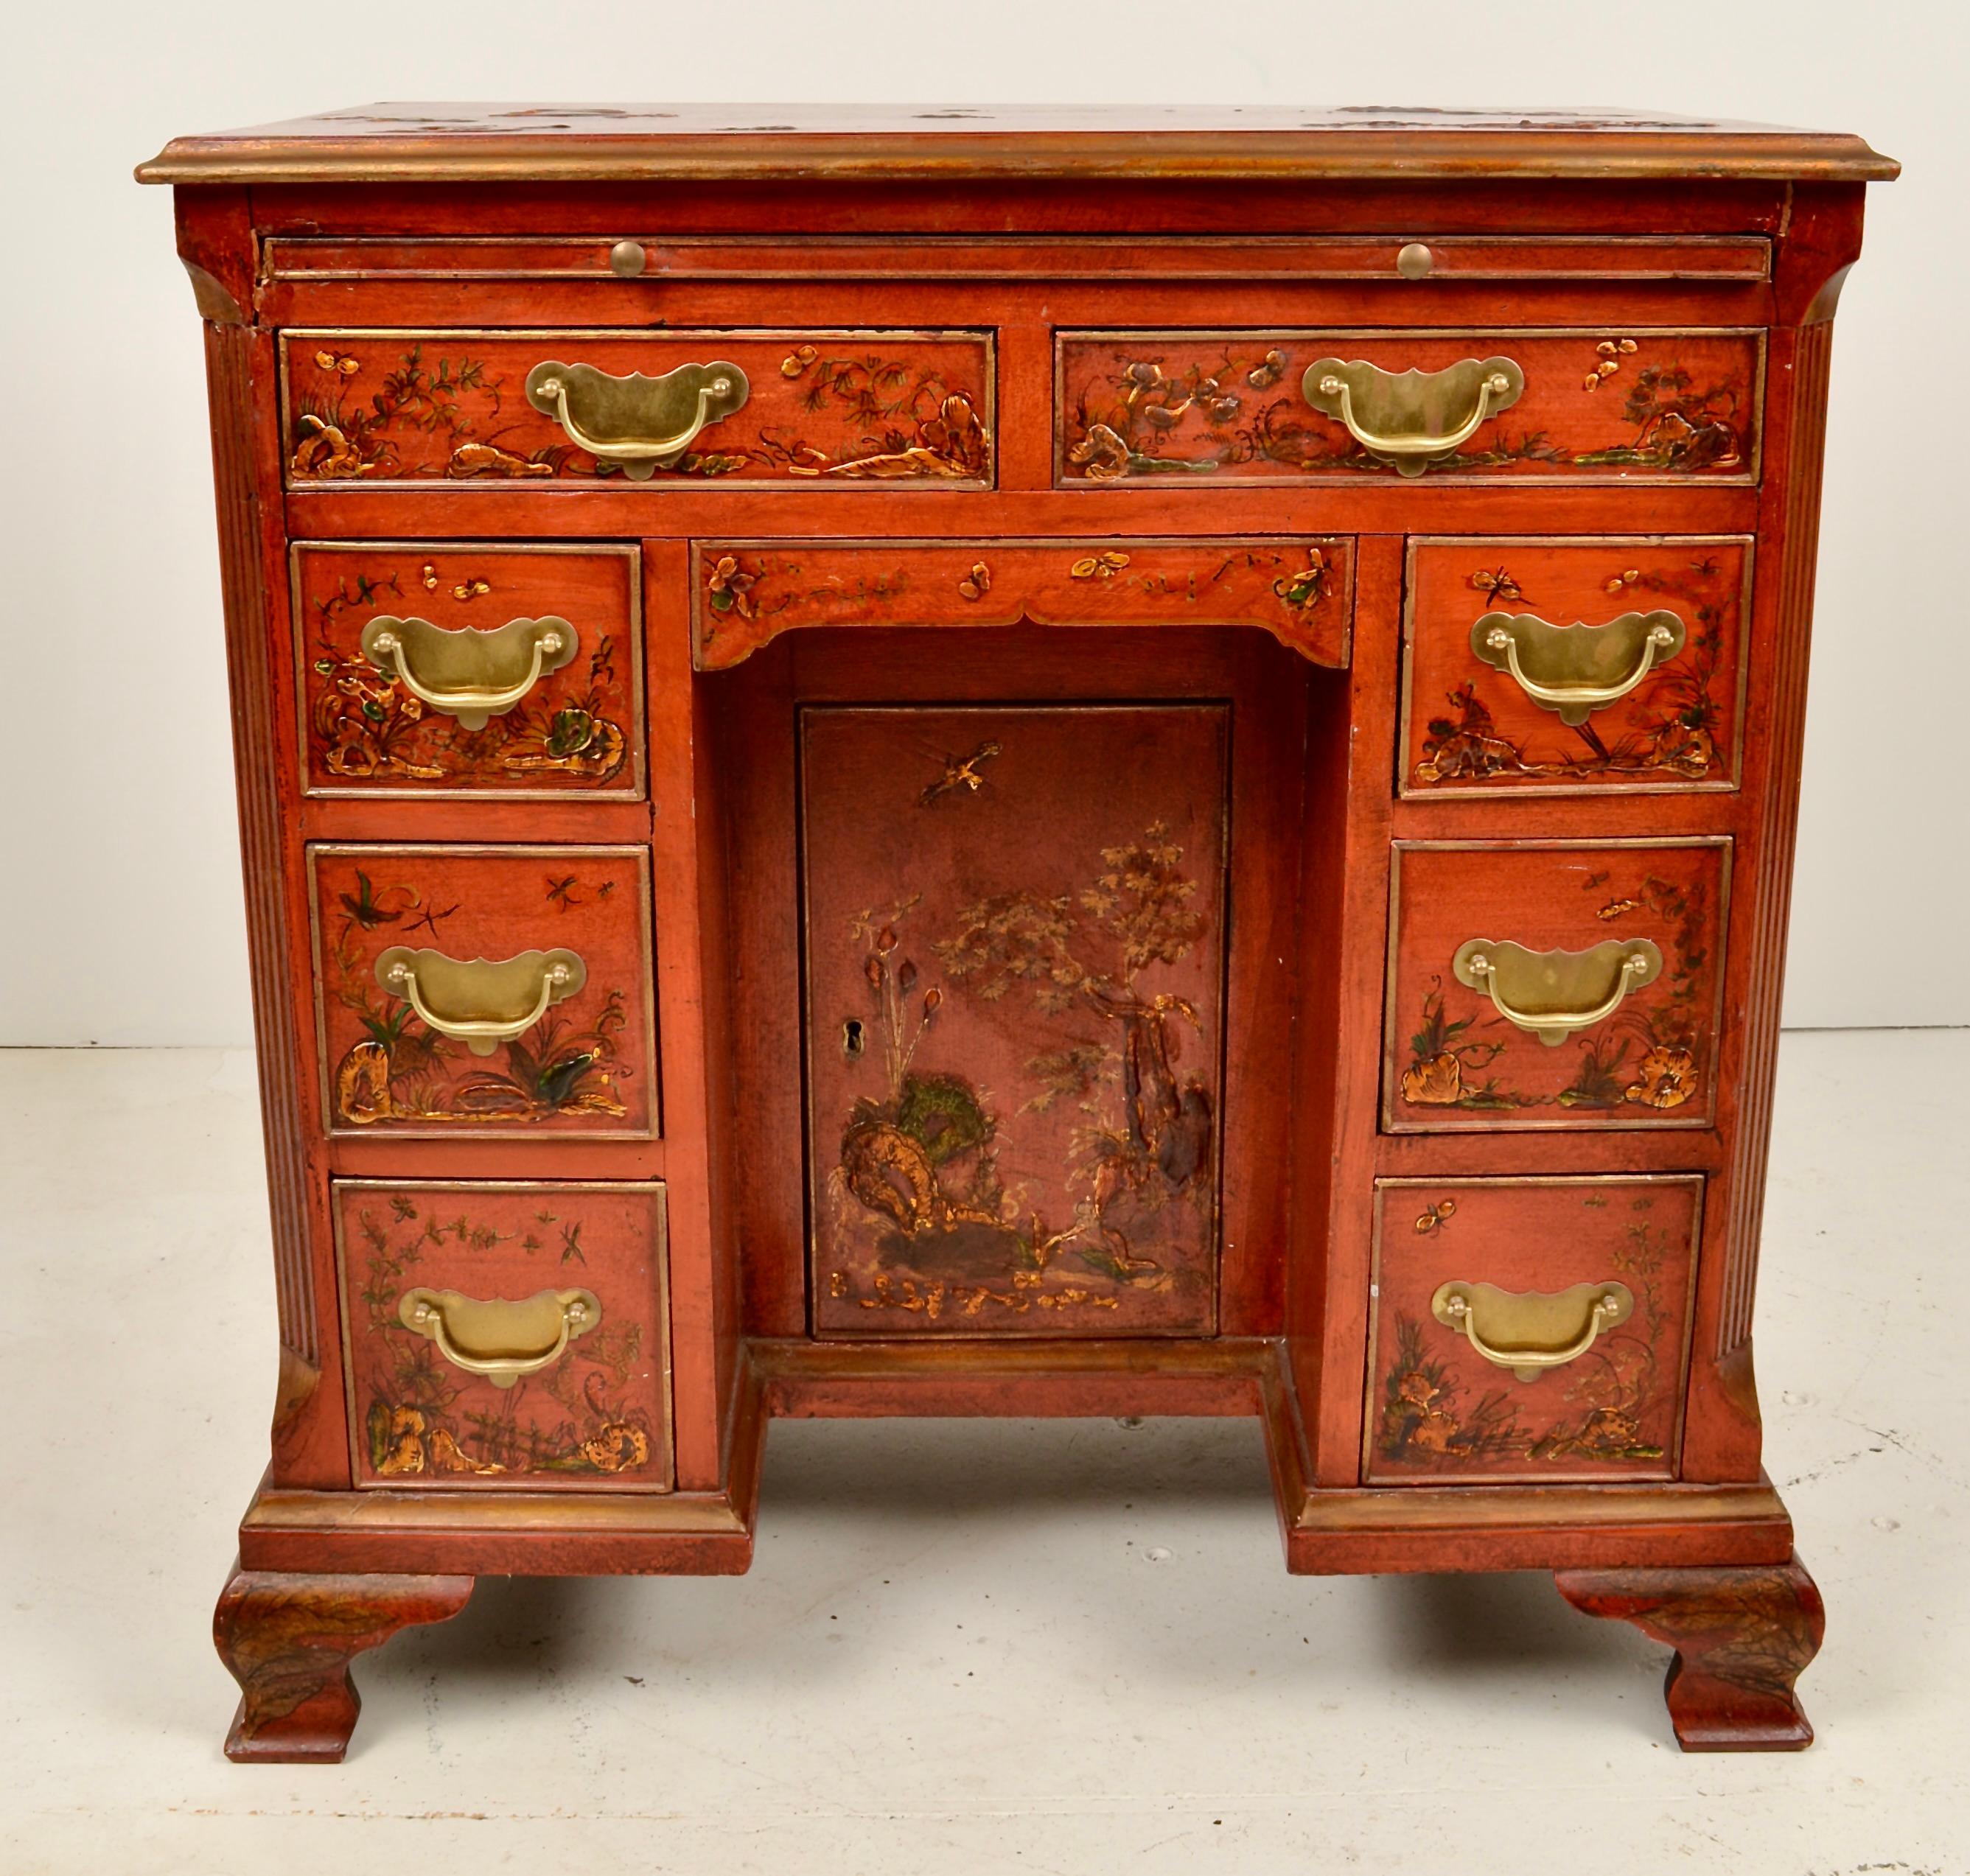 Lovely form on this 18th century desk with a beautiful chinoiserie finish added in the 19th century.  The color is remarkable with fine figured painting in the Chinese manner, accented with gilt. Featuring a center slide, eight drawers and a